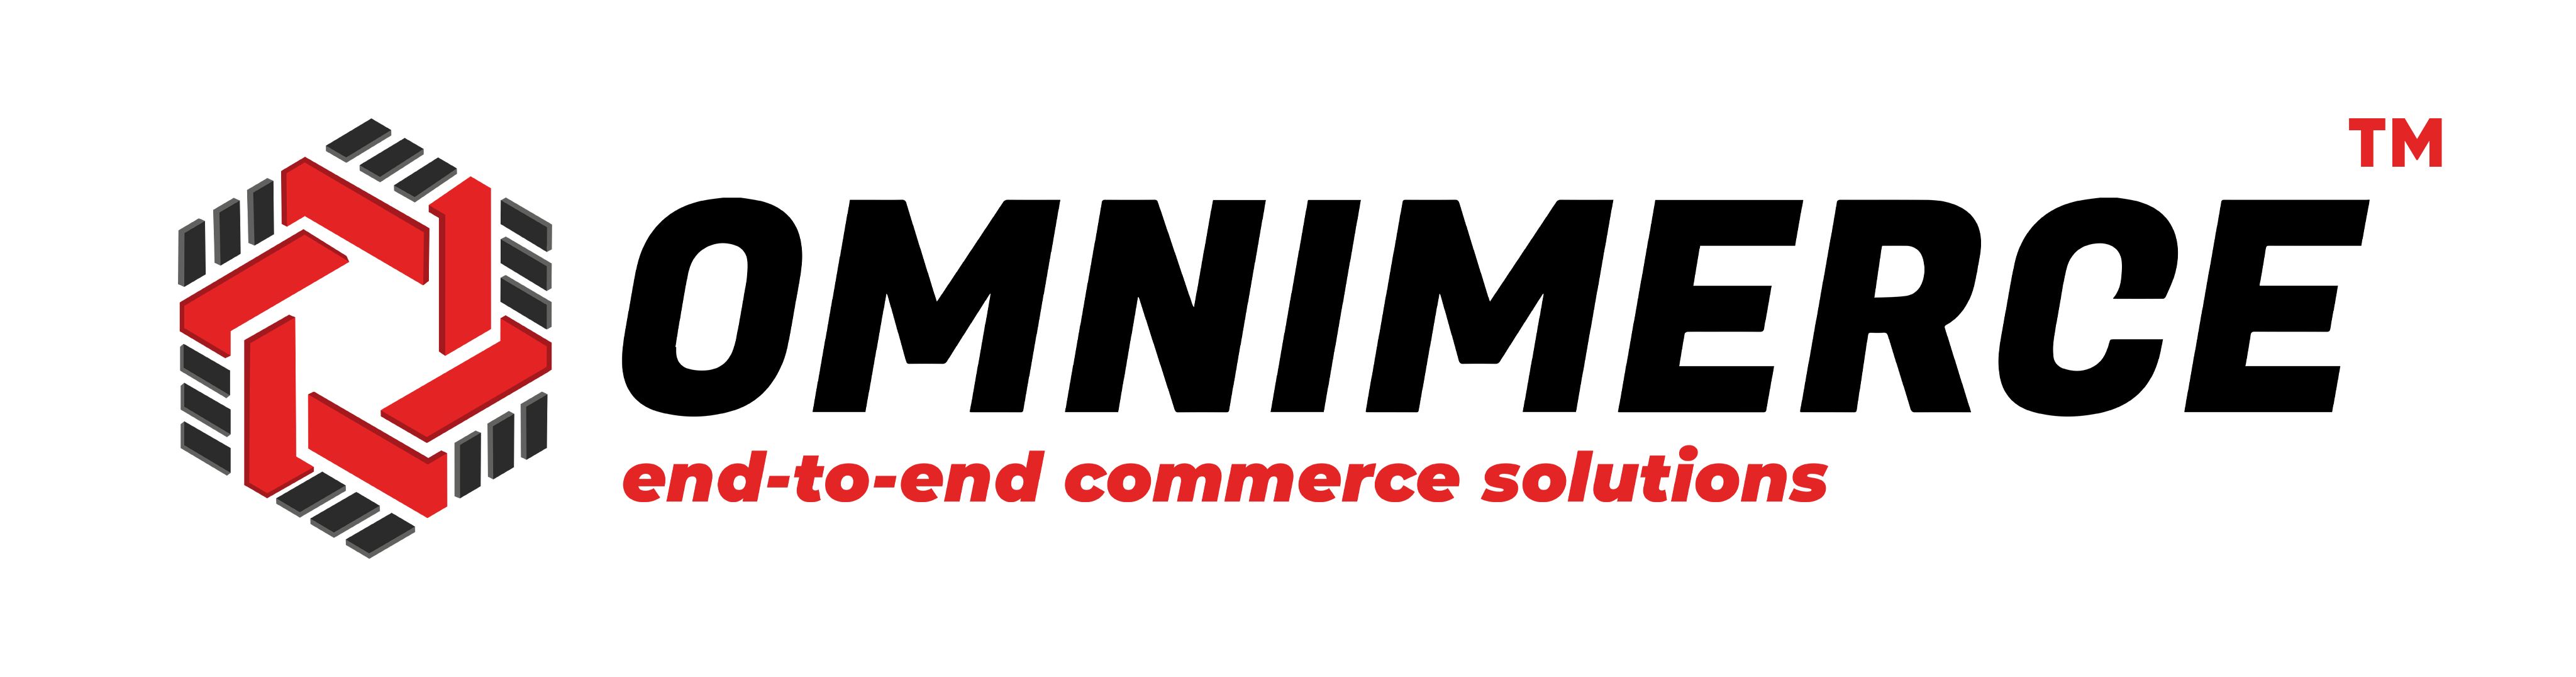 Omnimerce End-to-End Commerce Solutions